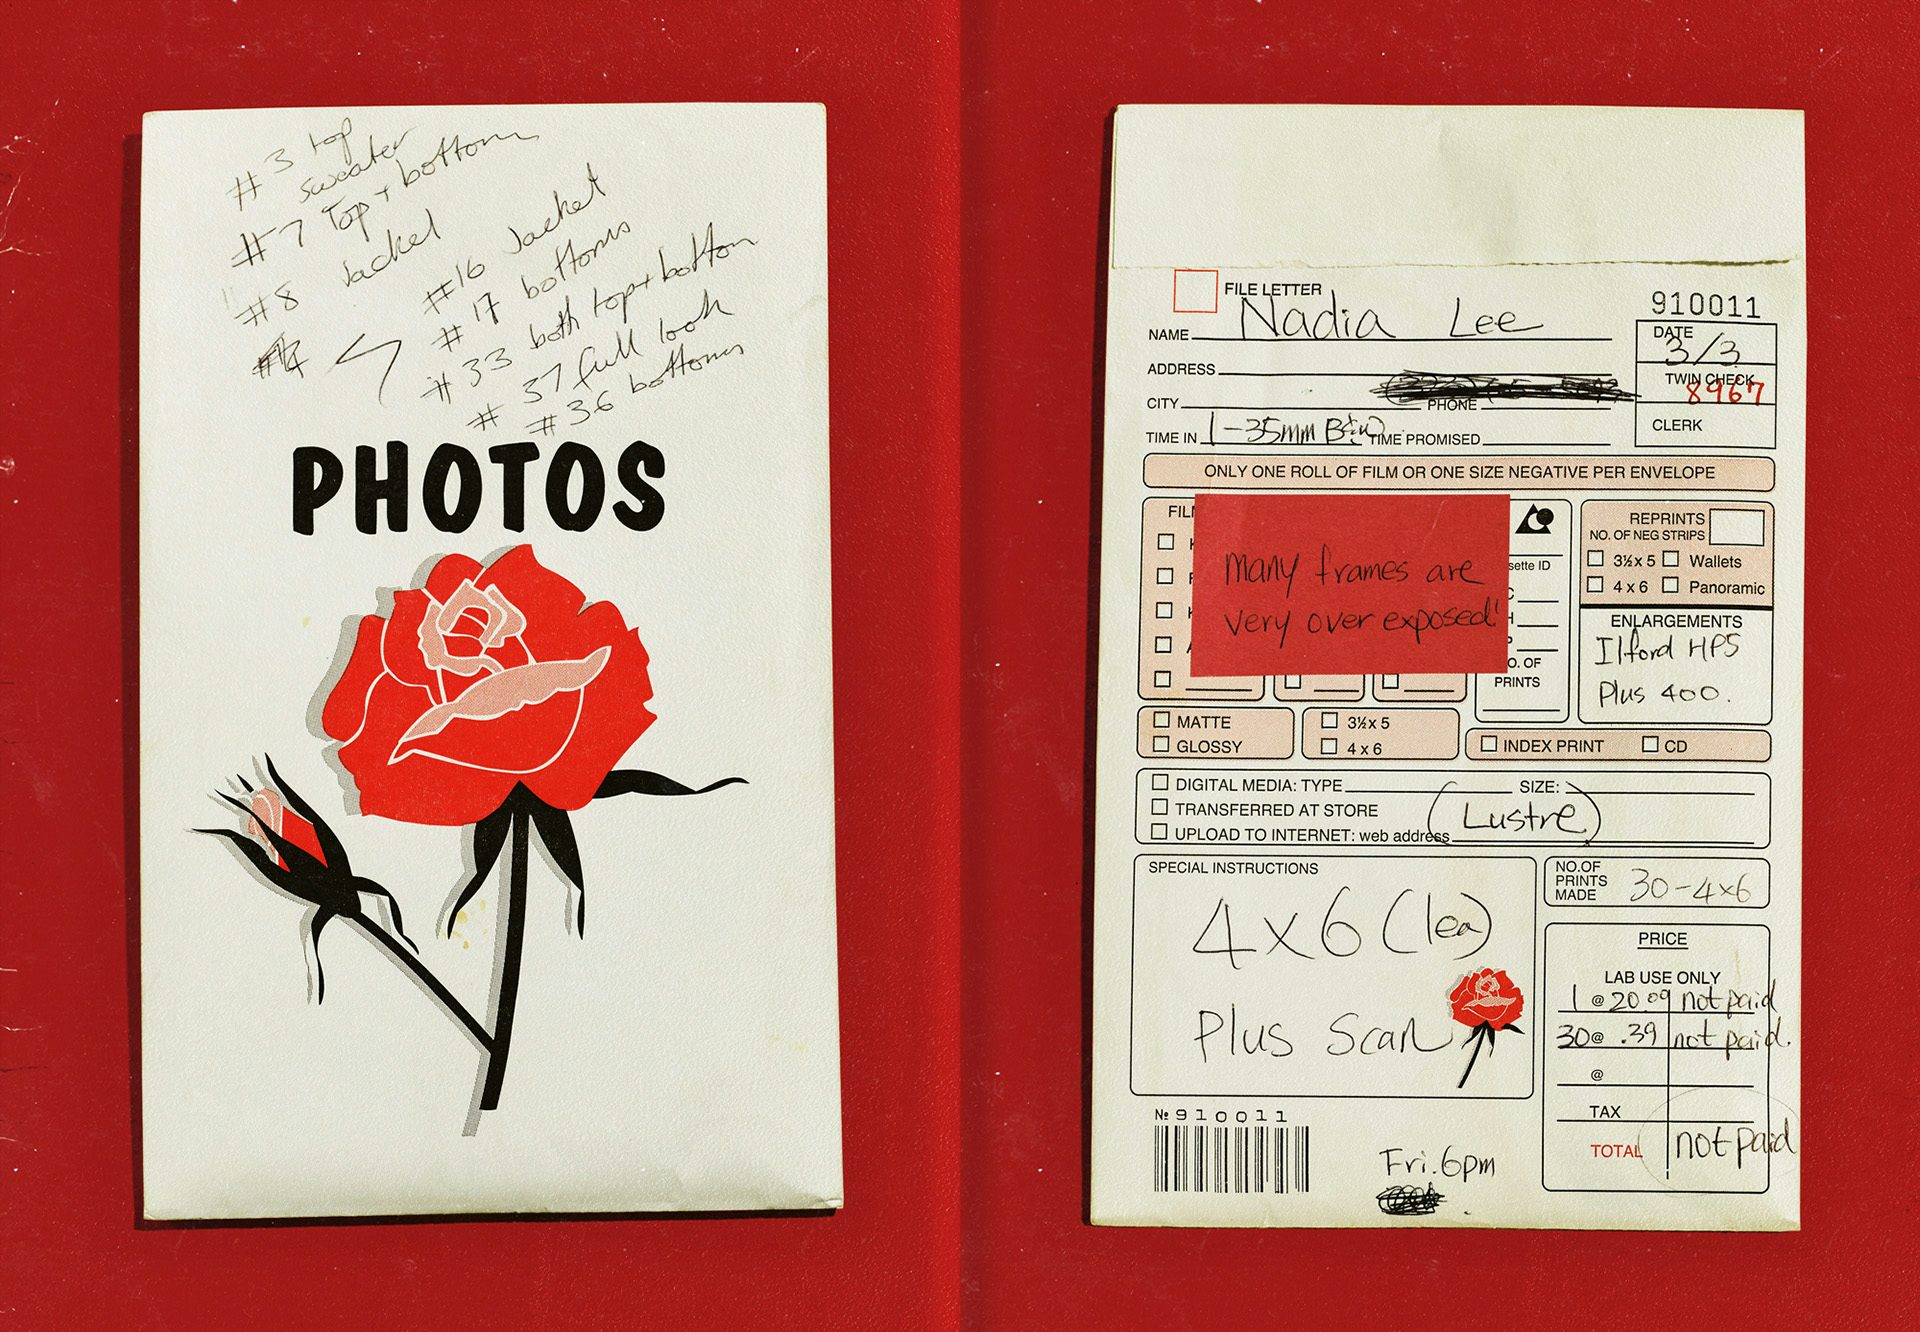 Spread from Women by Nadia Lee Cohen showing a sheet of paper headlined 'photos' next to an illustration of a red flower and scrawled notes, opposite an image of a photo wallet